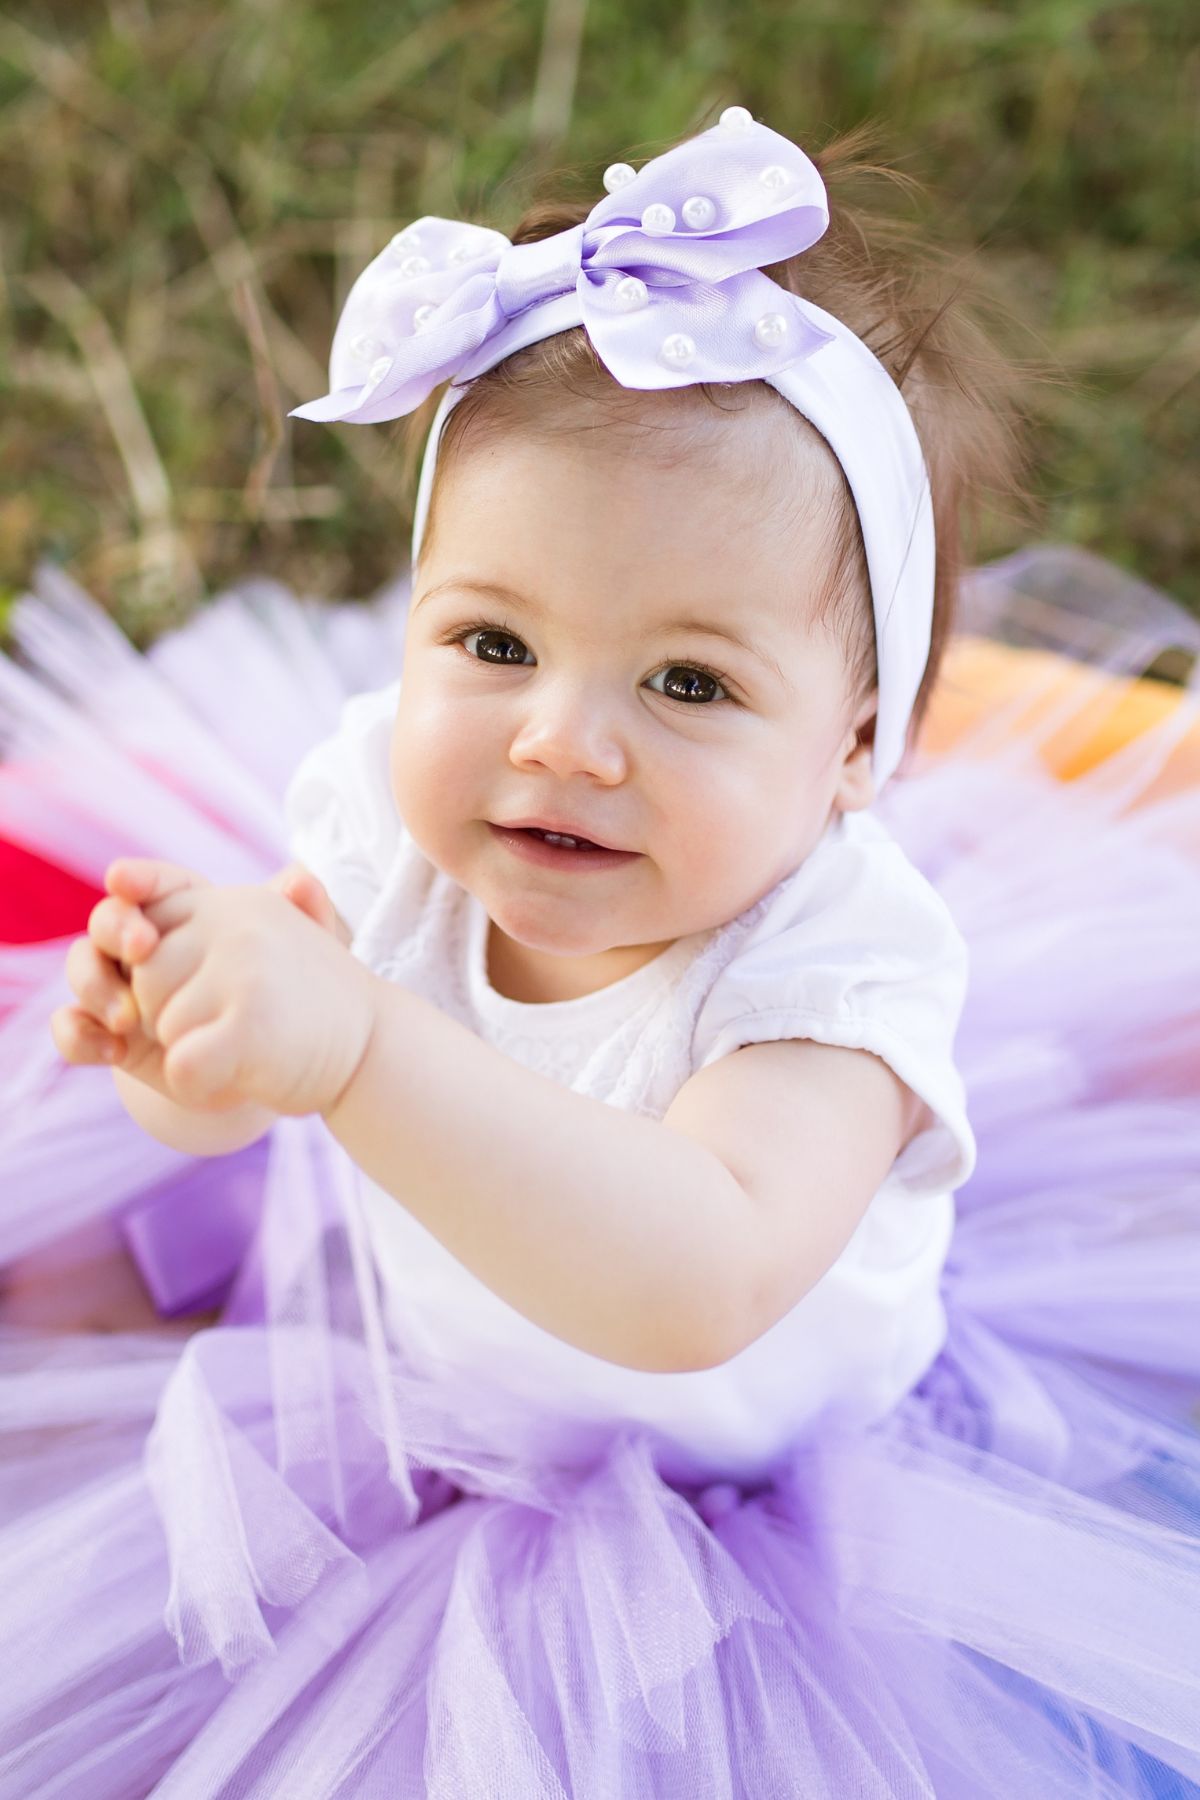 Baby girl in purple dress and headband with bow sitting outside.